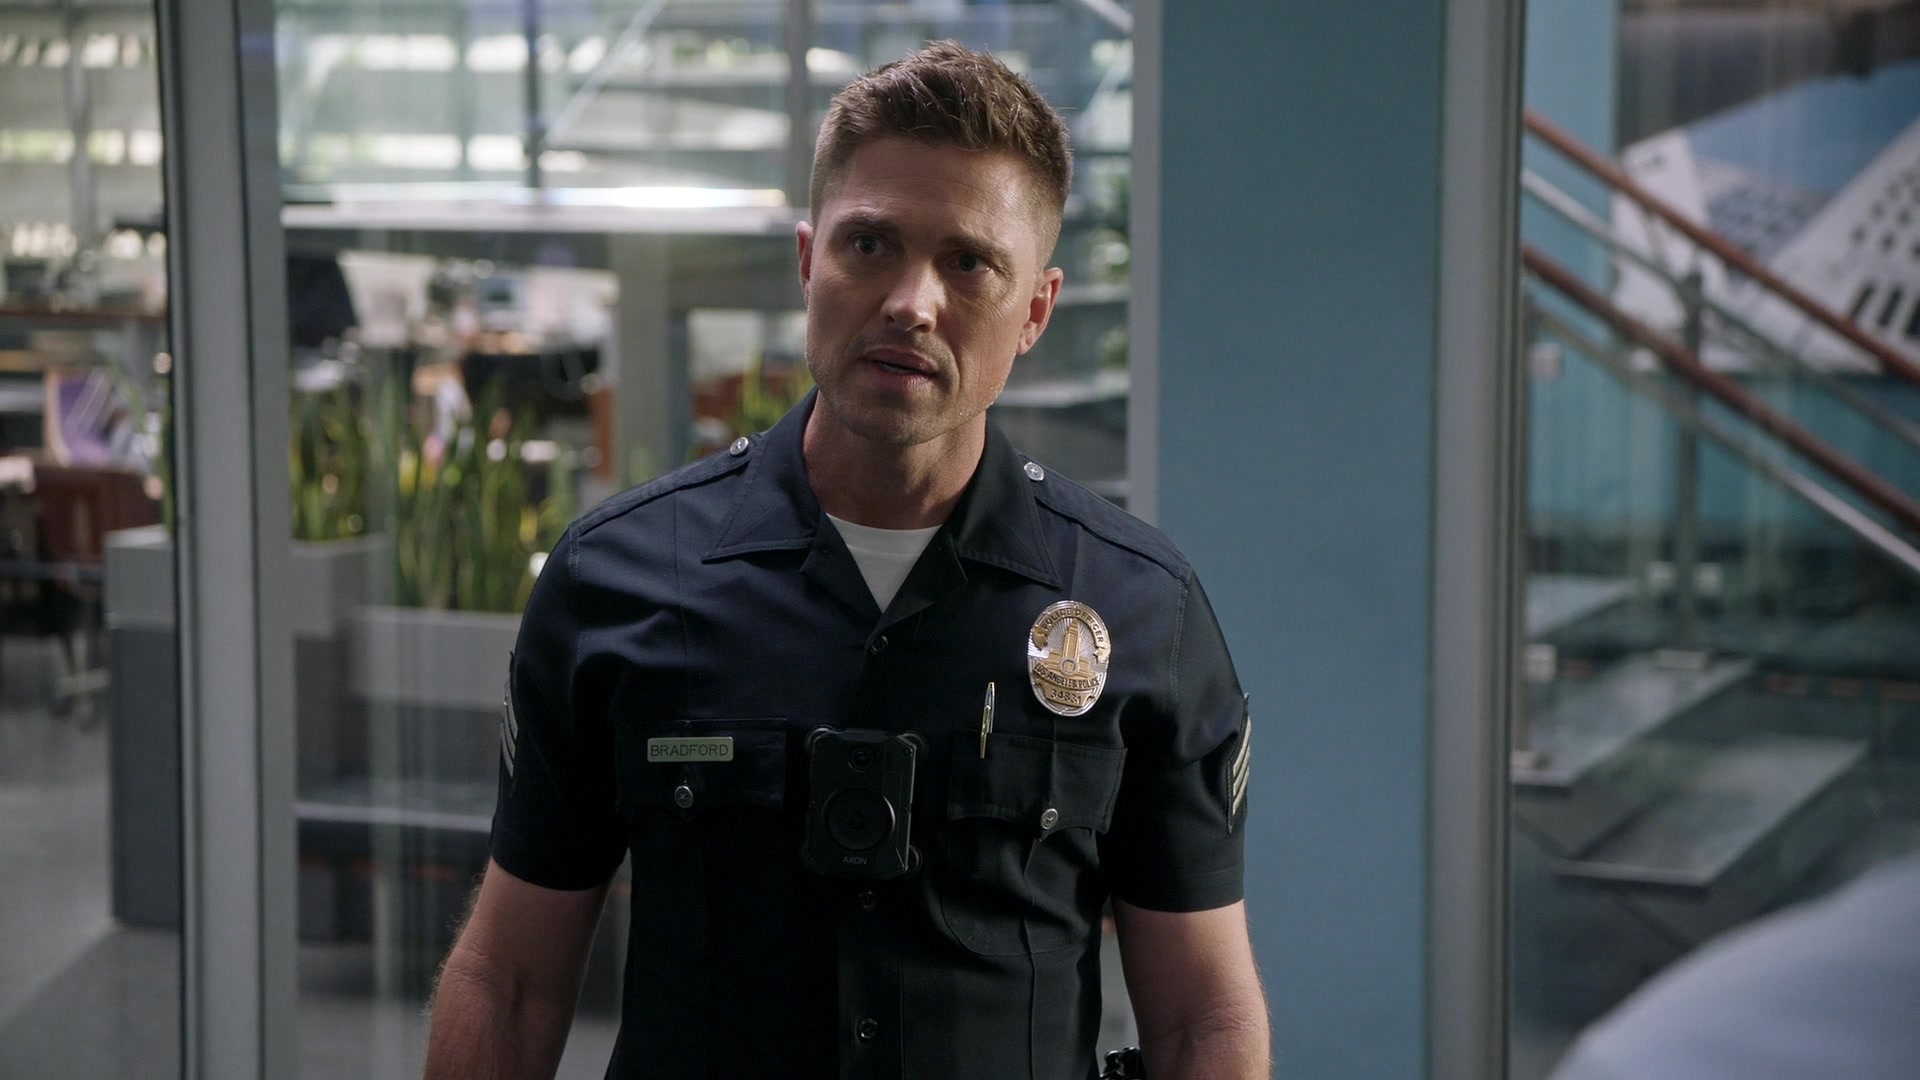 The Rookie TV Series, High-tech police gear, Body cameras, Crime-fighting technology, 1920x1080 Full HD Desktop